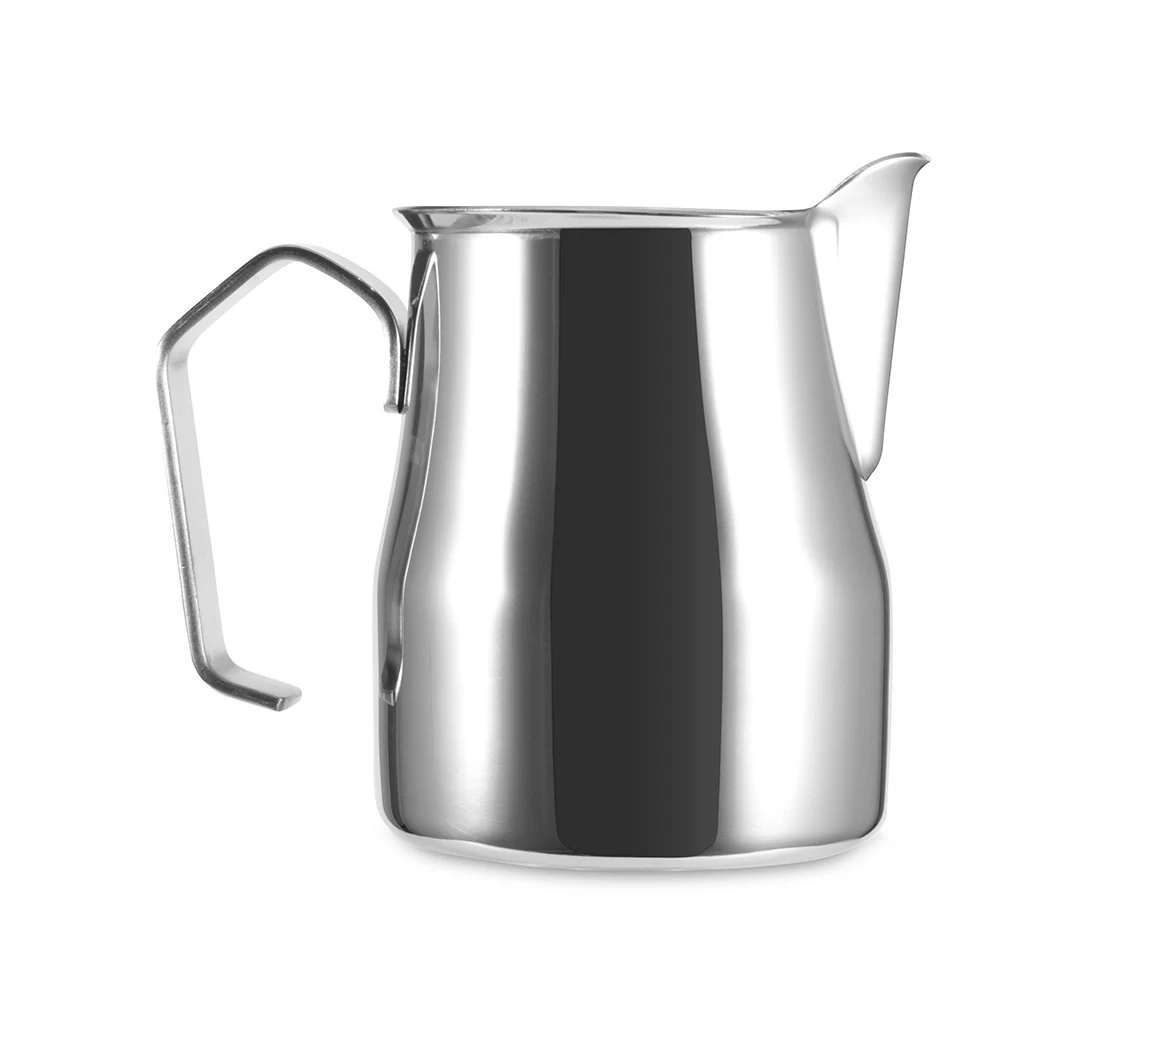 Stainless Steel Latte Art Jug Milk Cup Milk Frothing Pitcher